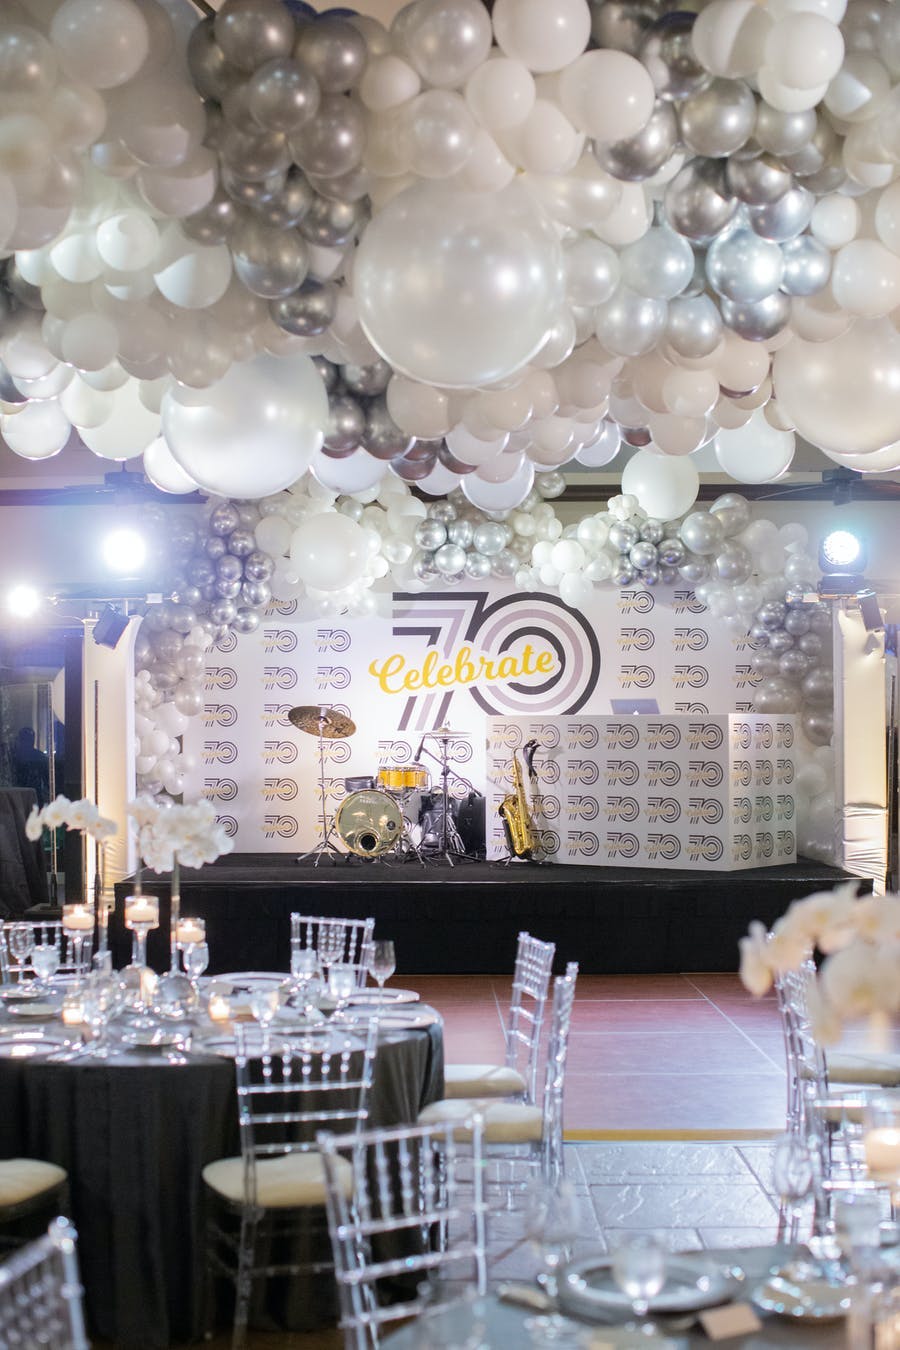 A room looking at a stage with instruments on it. White and silver balloons over the ceiling